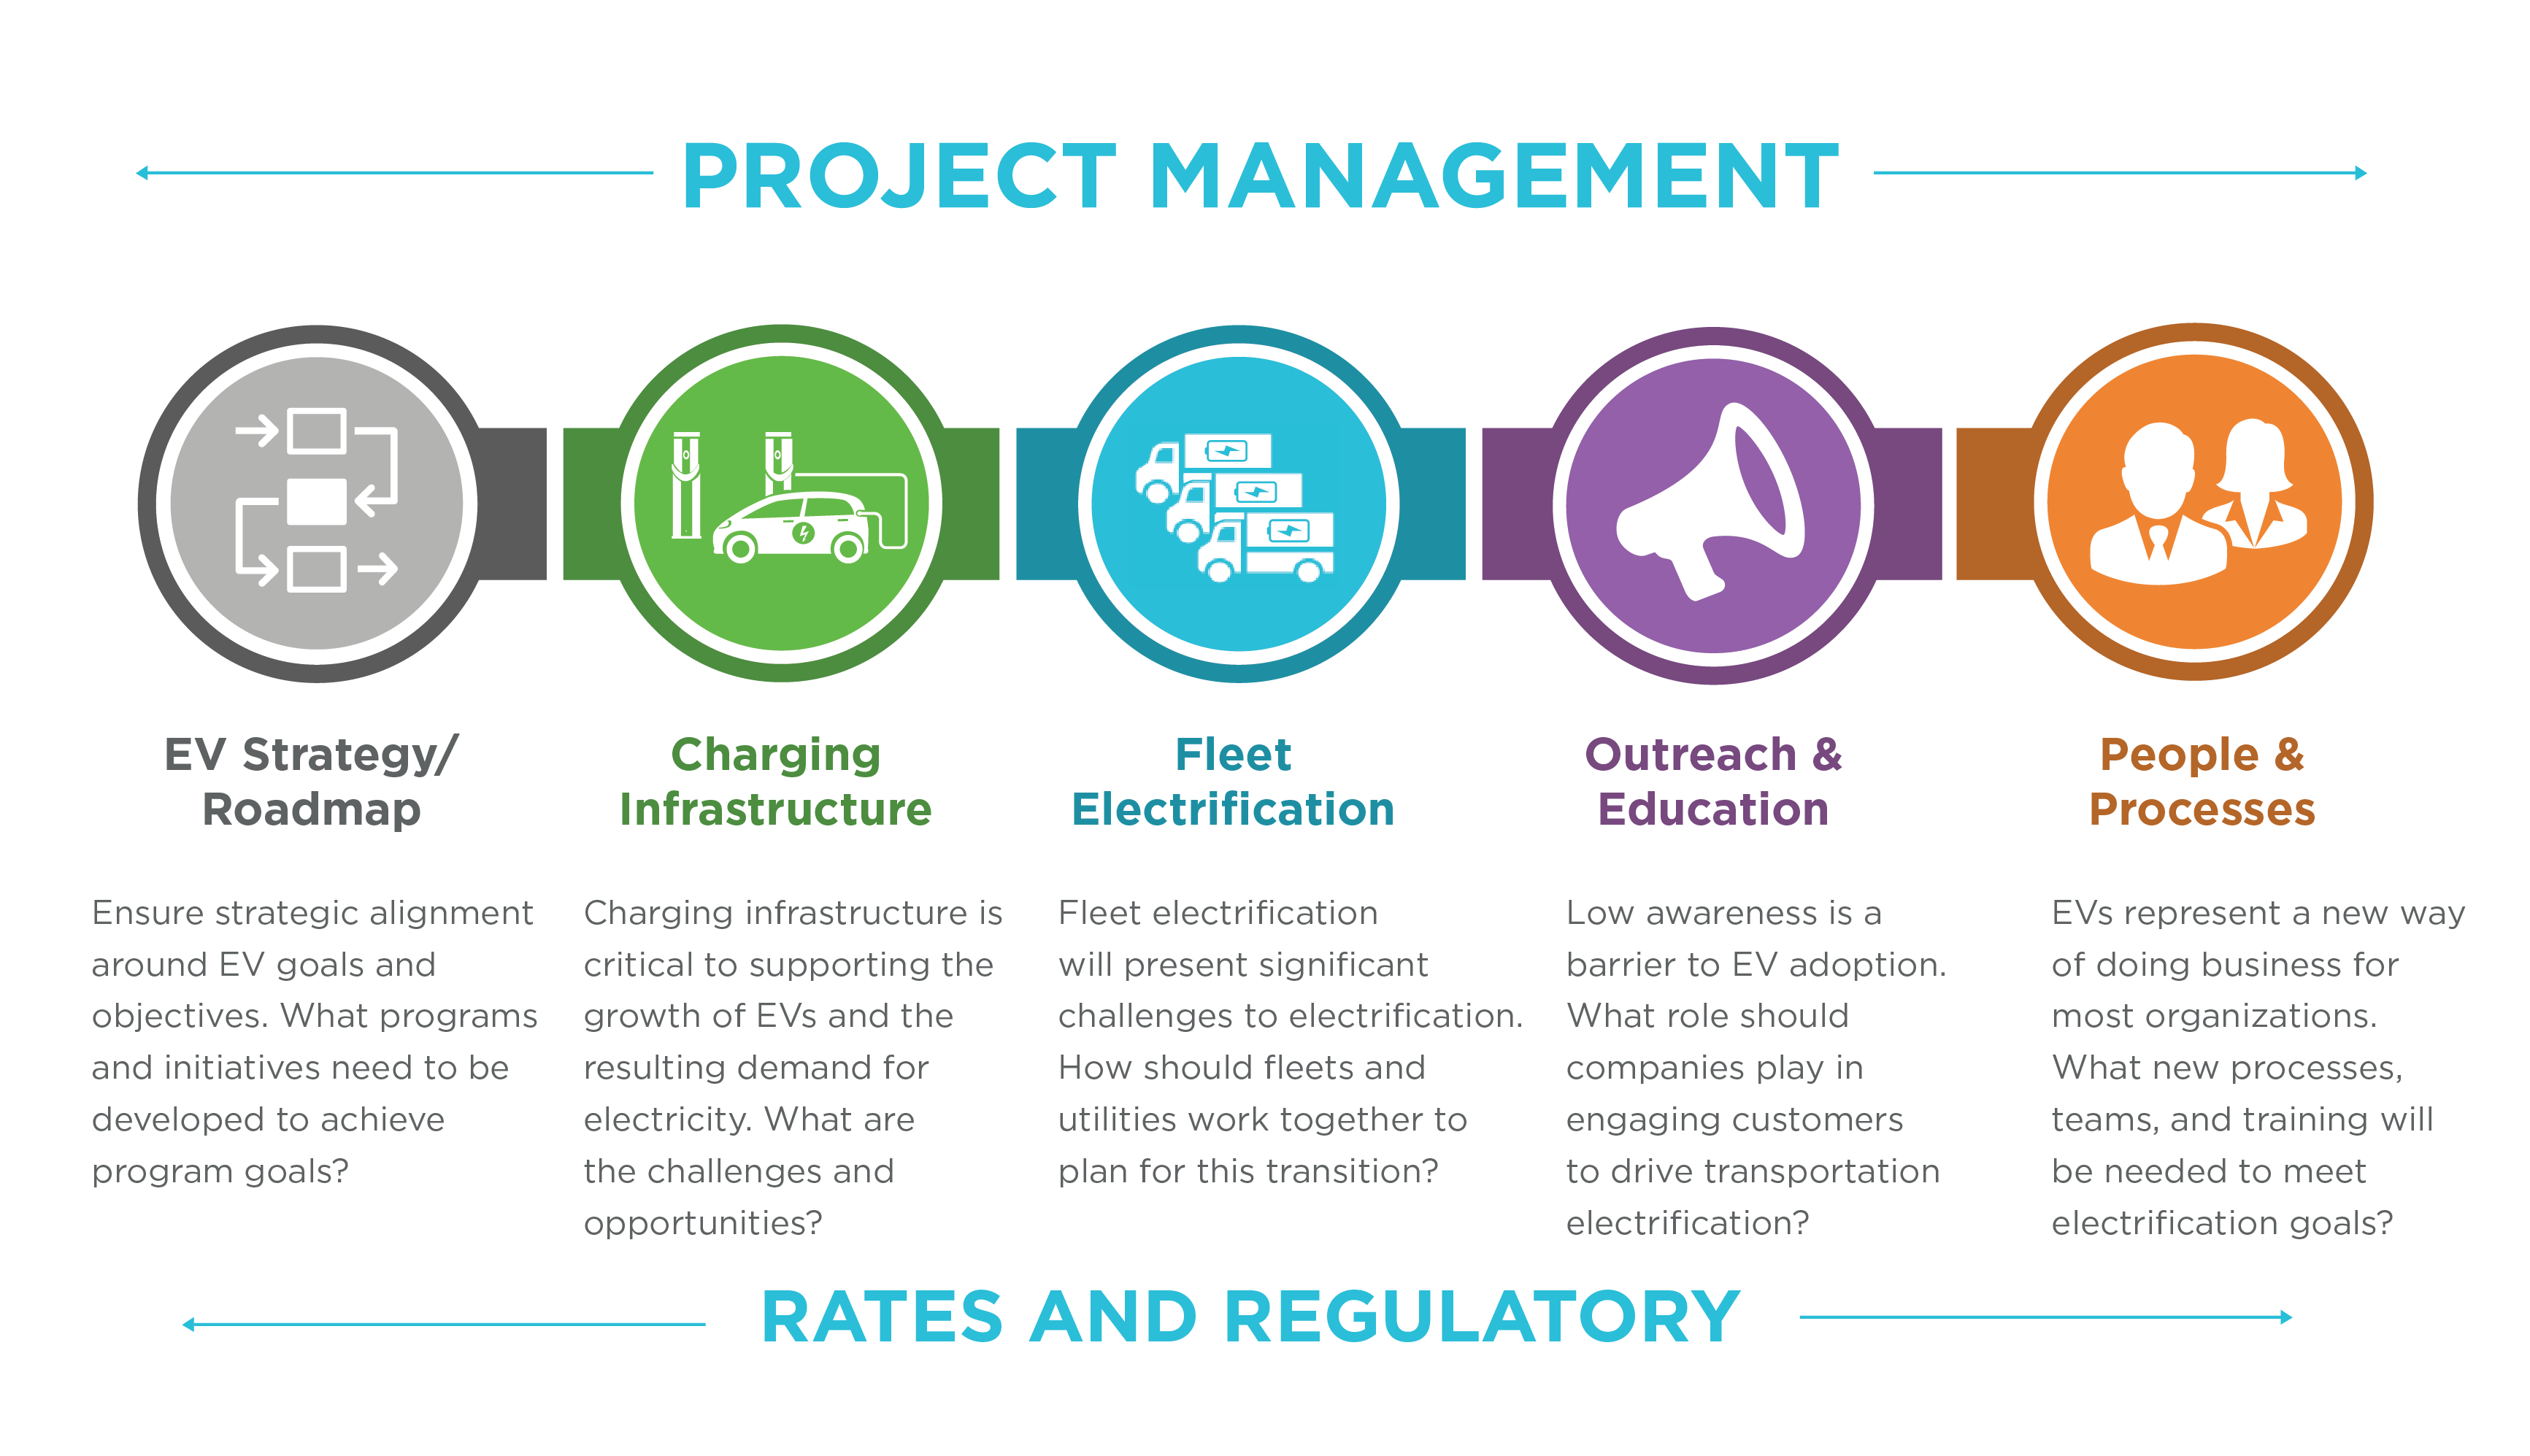 The ScottMadden Electric Vehicles Project Management Strategy. The EV Strategy/Roadmap, Charging Infrastructure, Fleet Electrification, Outreach and Education, People and Processes